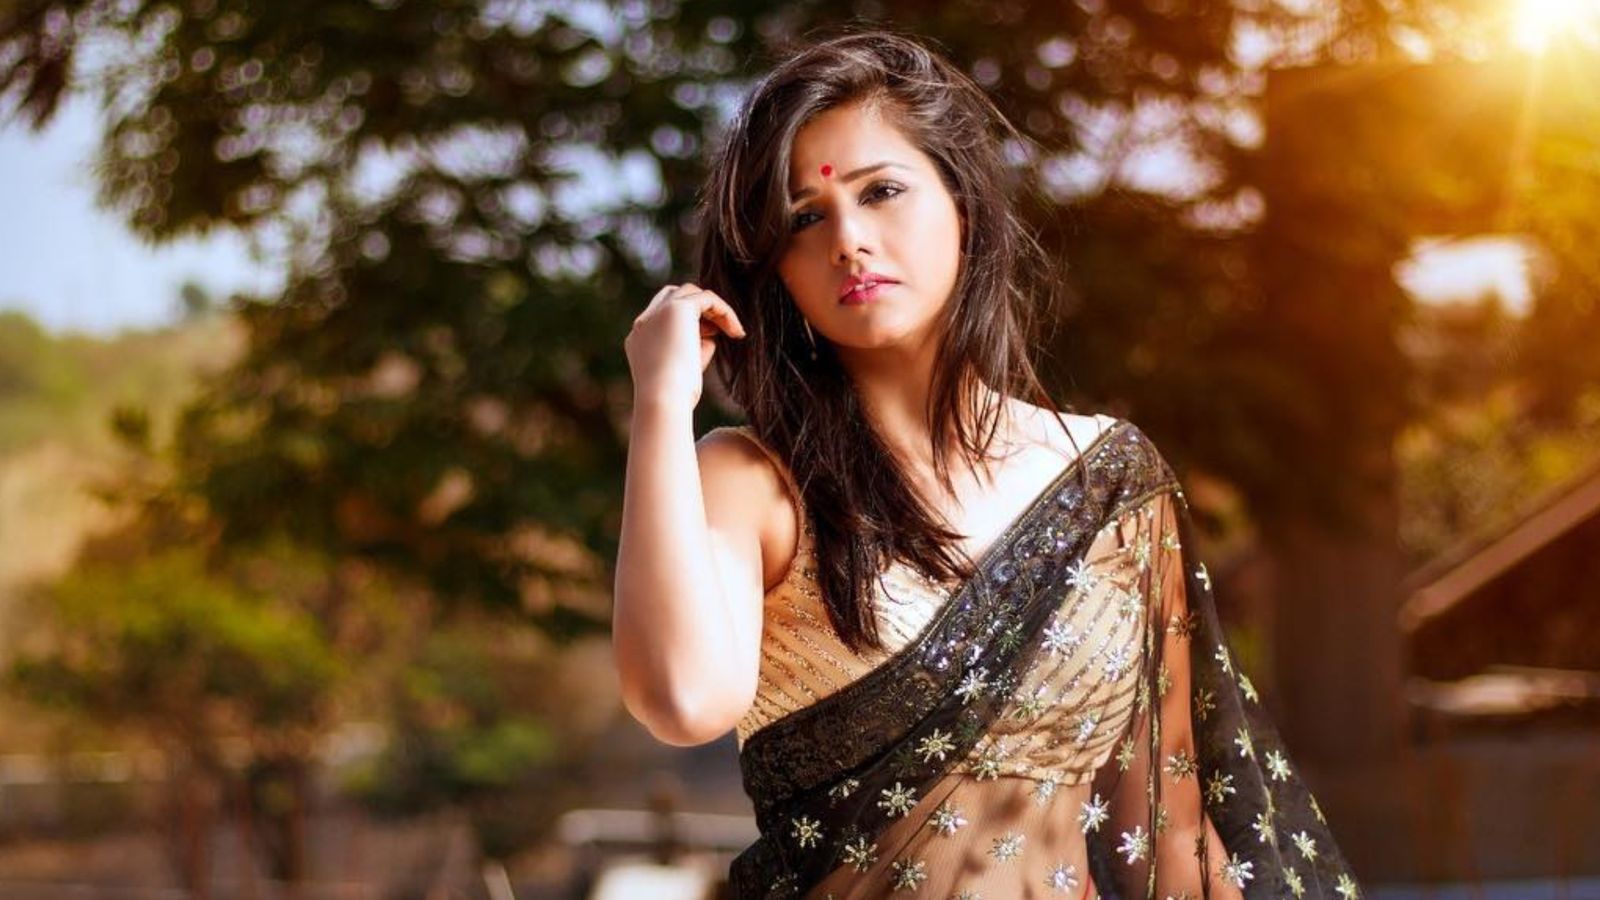 TV Actress Dalljiet Kaur Gets Flooded With Hate Mail For Playing A Negative Role In Guddan - Tumse Na Ho Payega